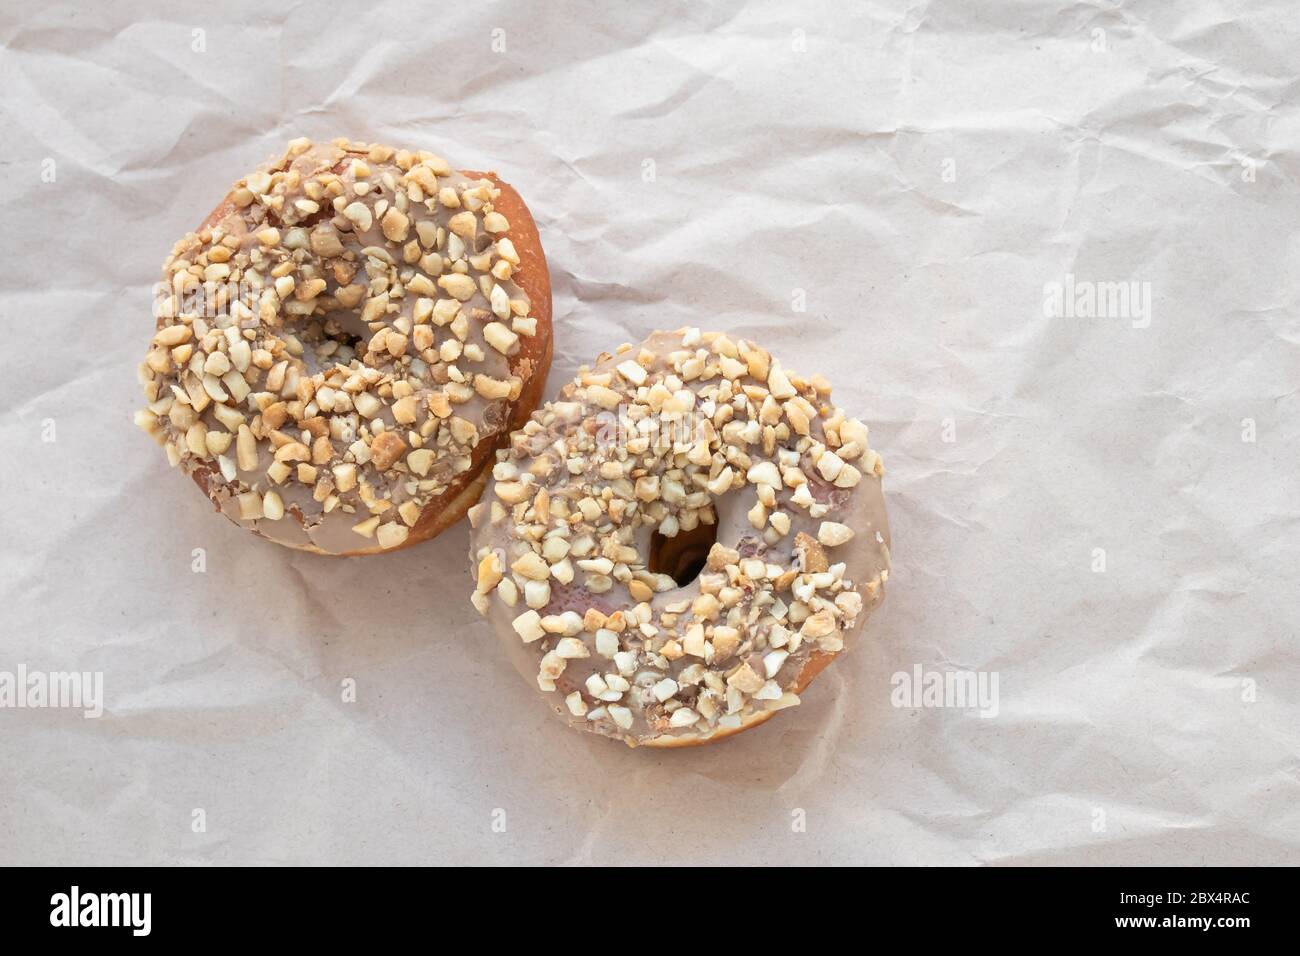 Brown glazed donuts sprinkled with nuts on crumpled beige paper background. Unhealthy high-calorie food. Empty place for text. Copy space Stock Photo